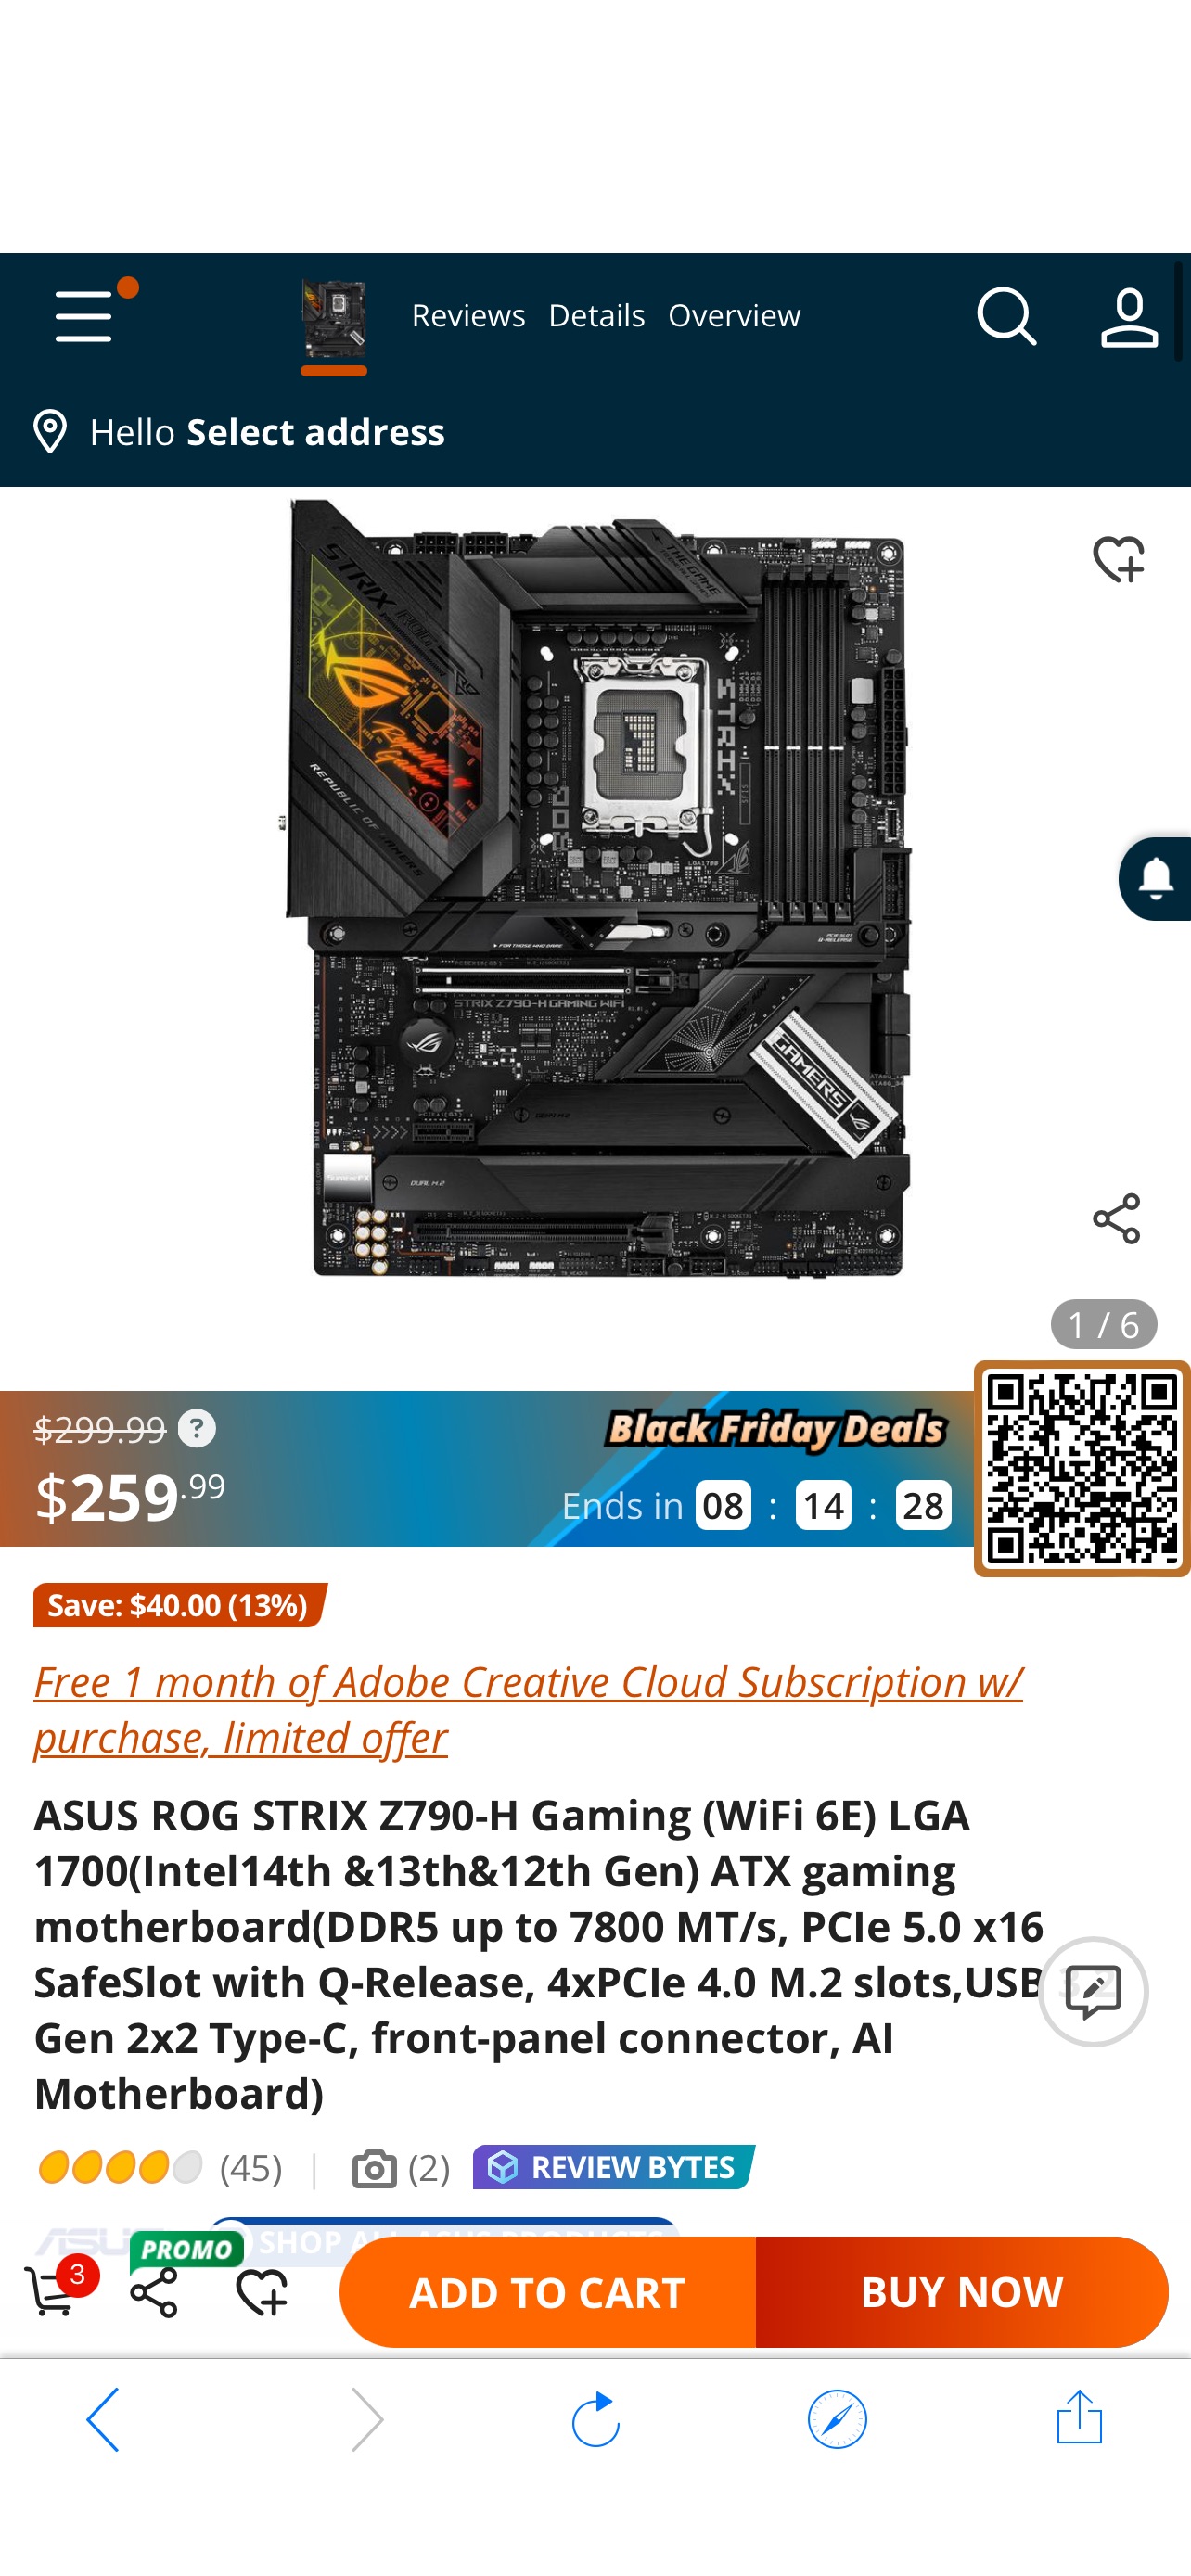 ASUS ROG STRIX Z790-H Gaming (WiFi 6E) LGA 1700(Intel14th &13th&12th Gen) ATX gaming motherboard(DDR5 up to 7800 MT/s, PCIe 5.0 x16 SafeSlot with Q-Release, 4xPCIe 4.0 M.2 slots,USB 3.2 Gen 2x2 Type-C